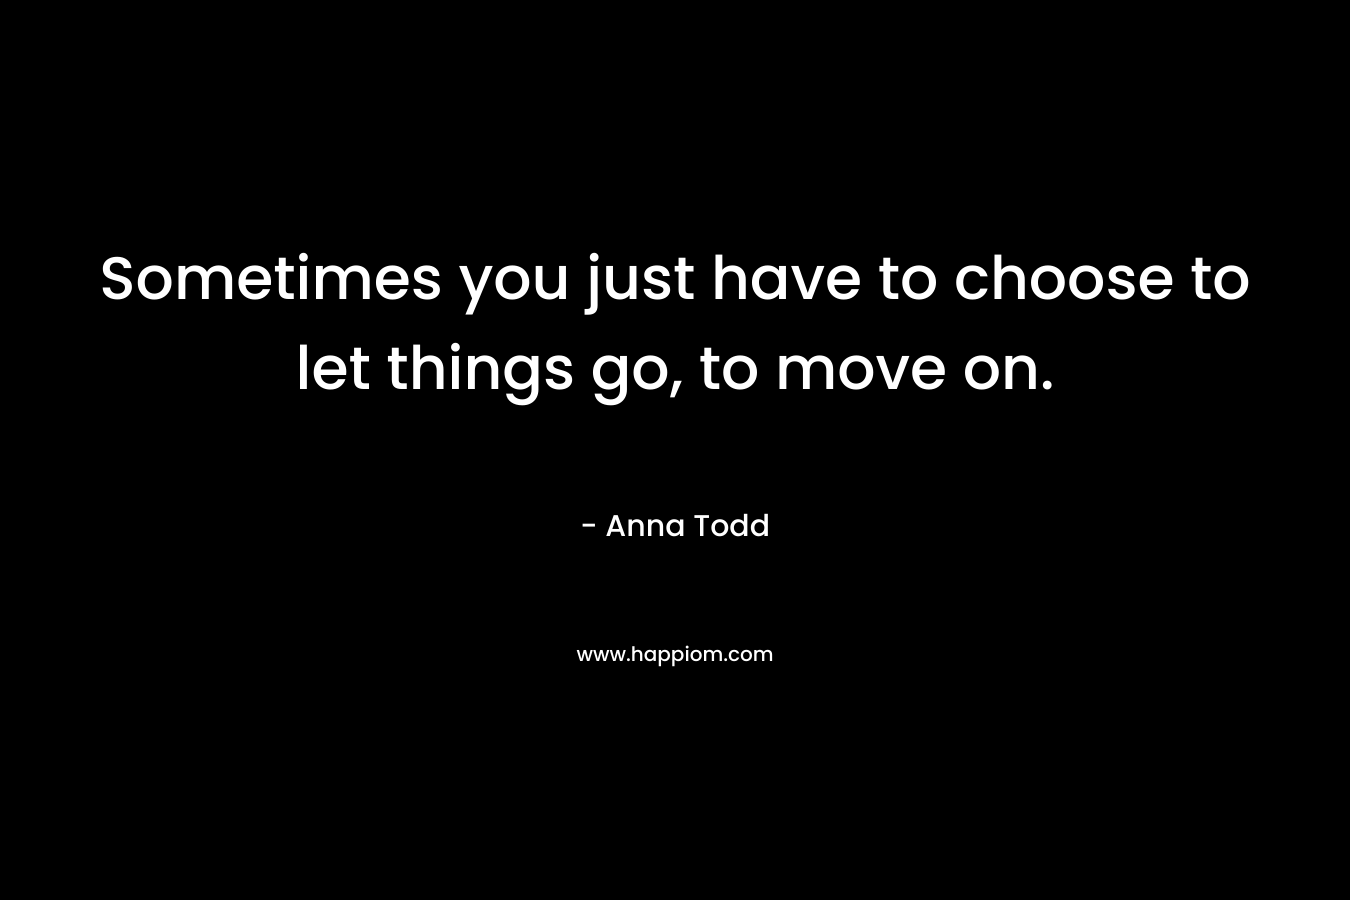 Sometimes you just have to choose to let things go, to move on.